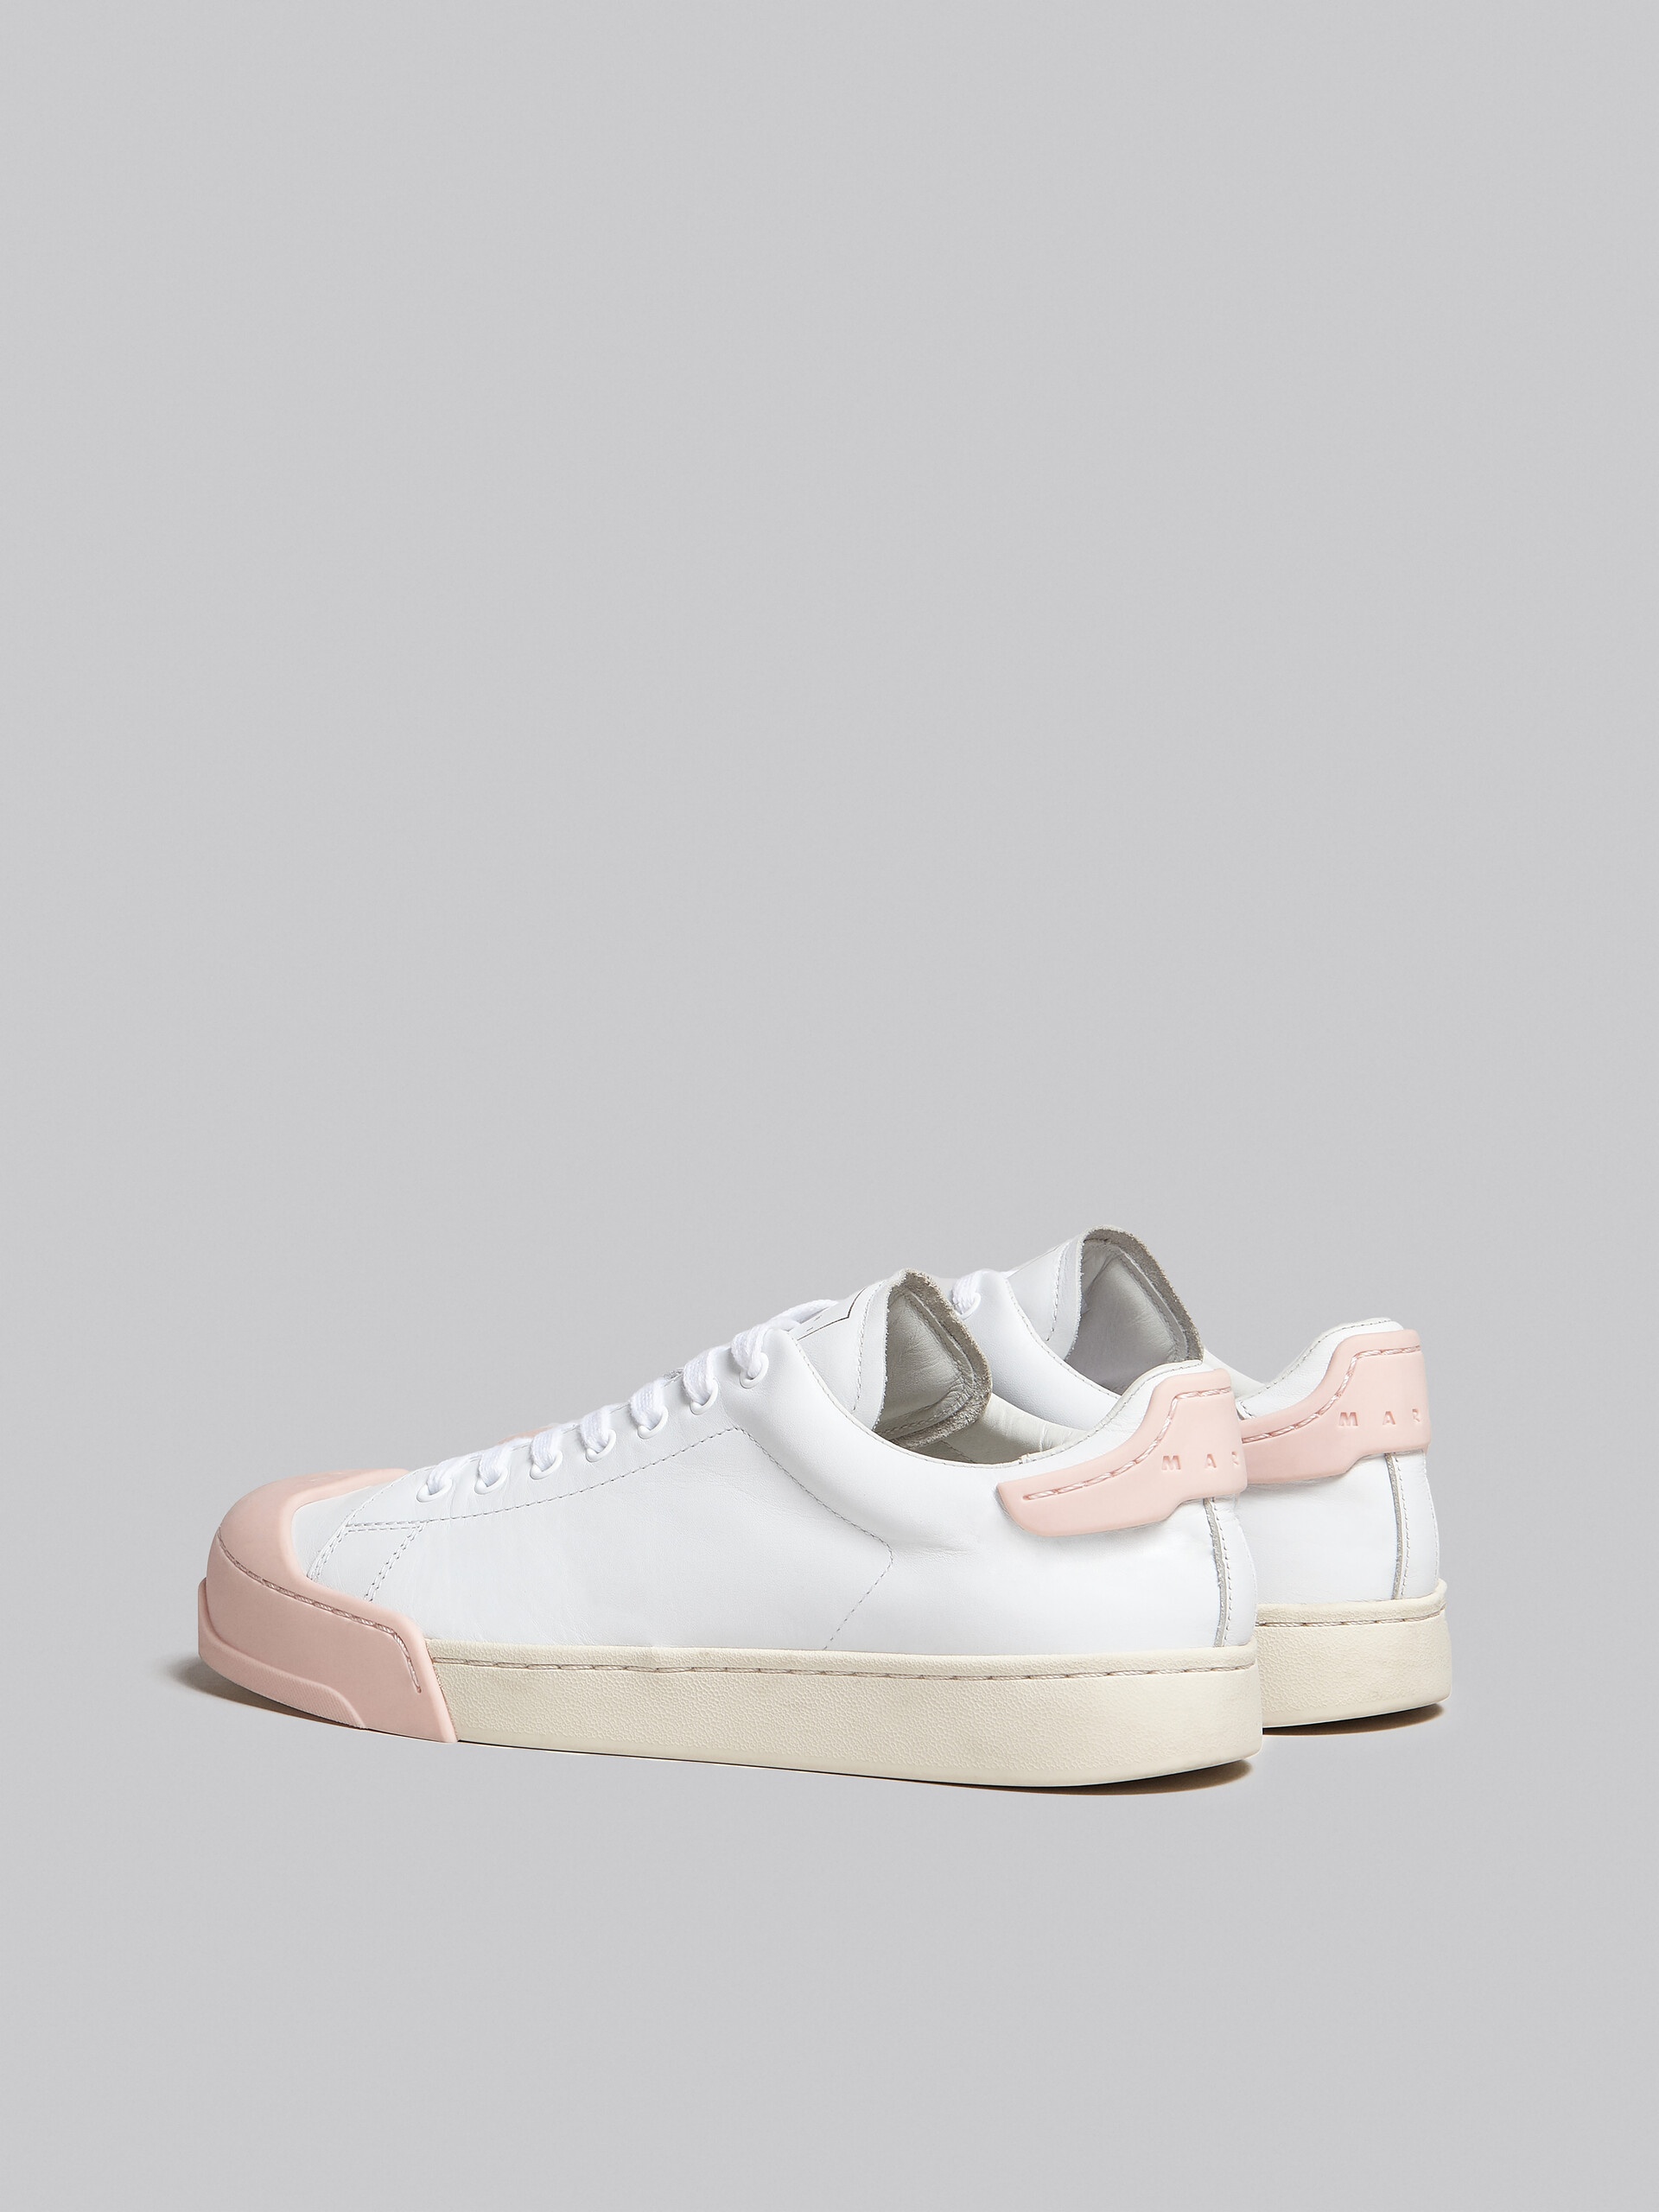 DADA BUMPER SNEAKER IN WHITE AND PINK LEATHER - 3